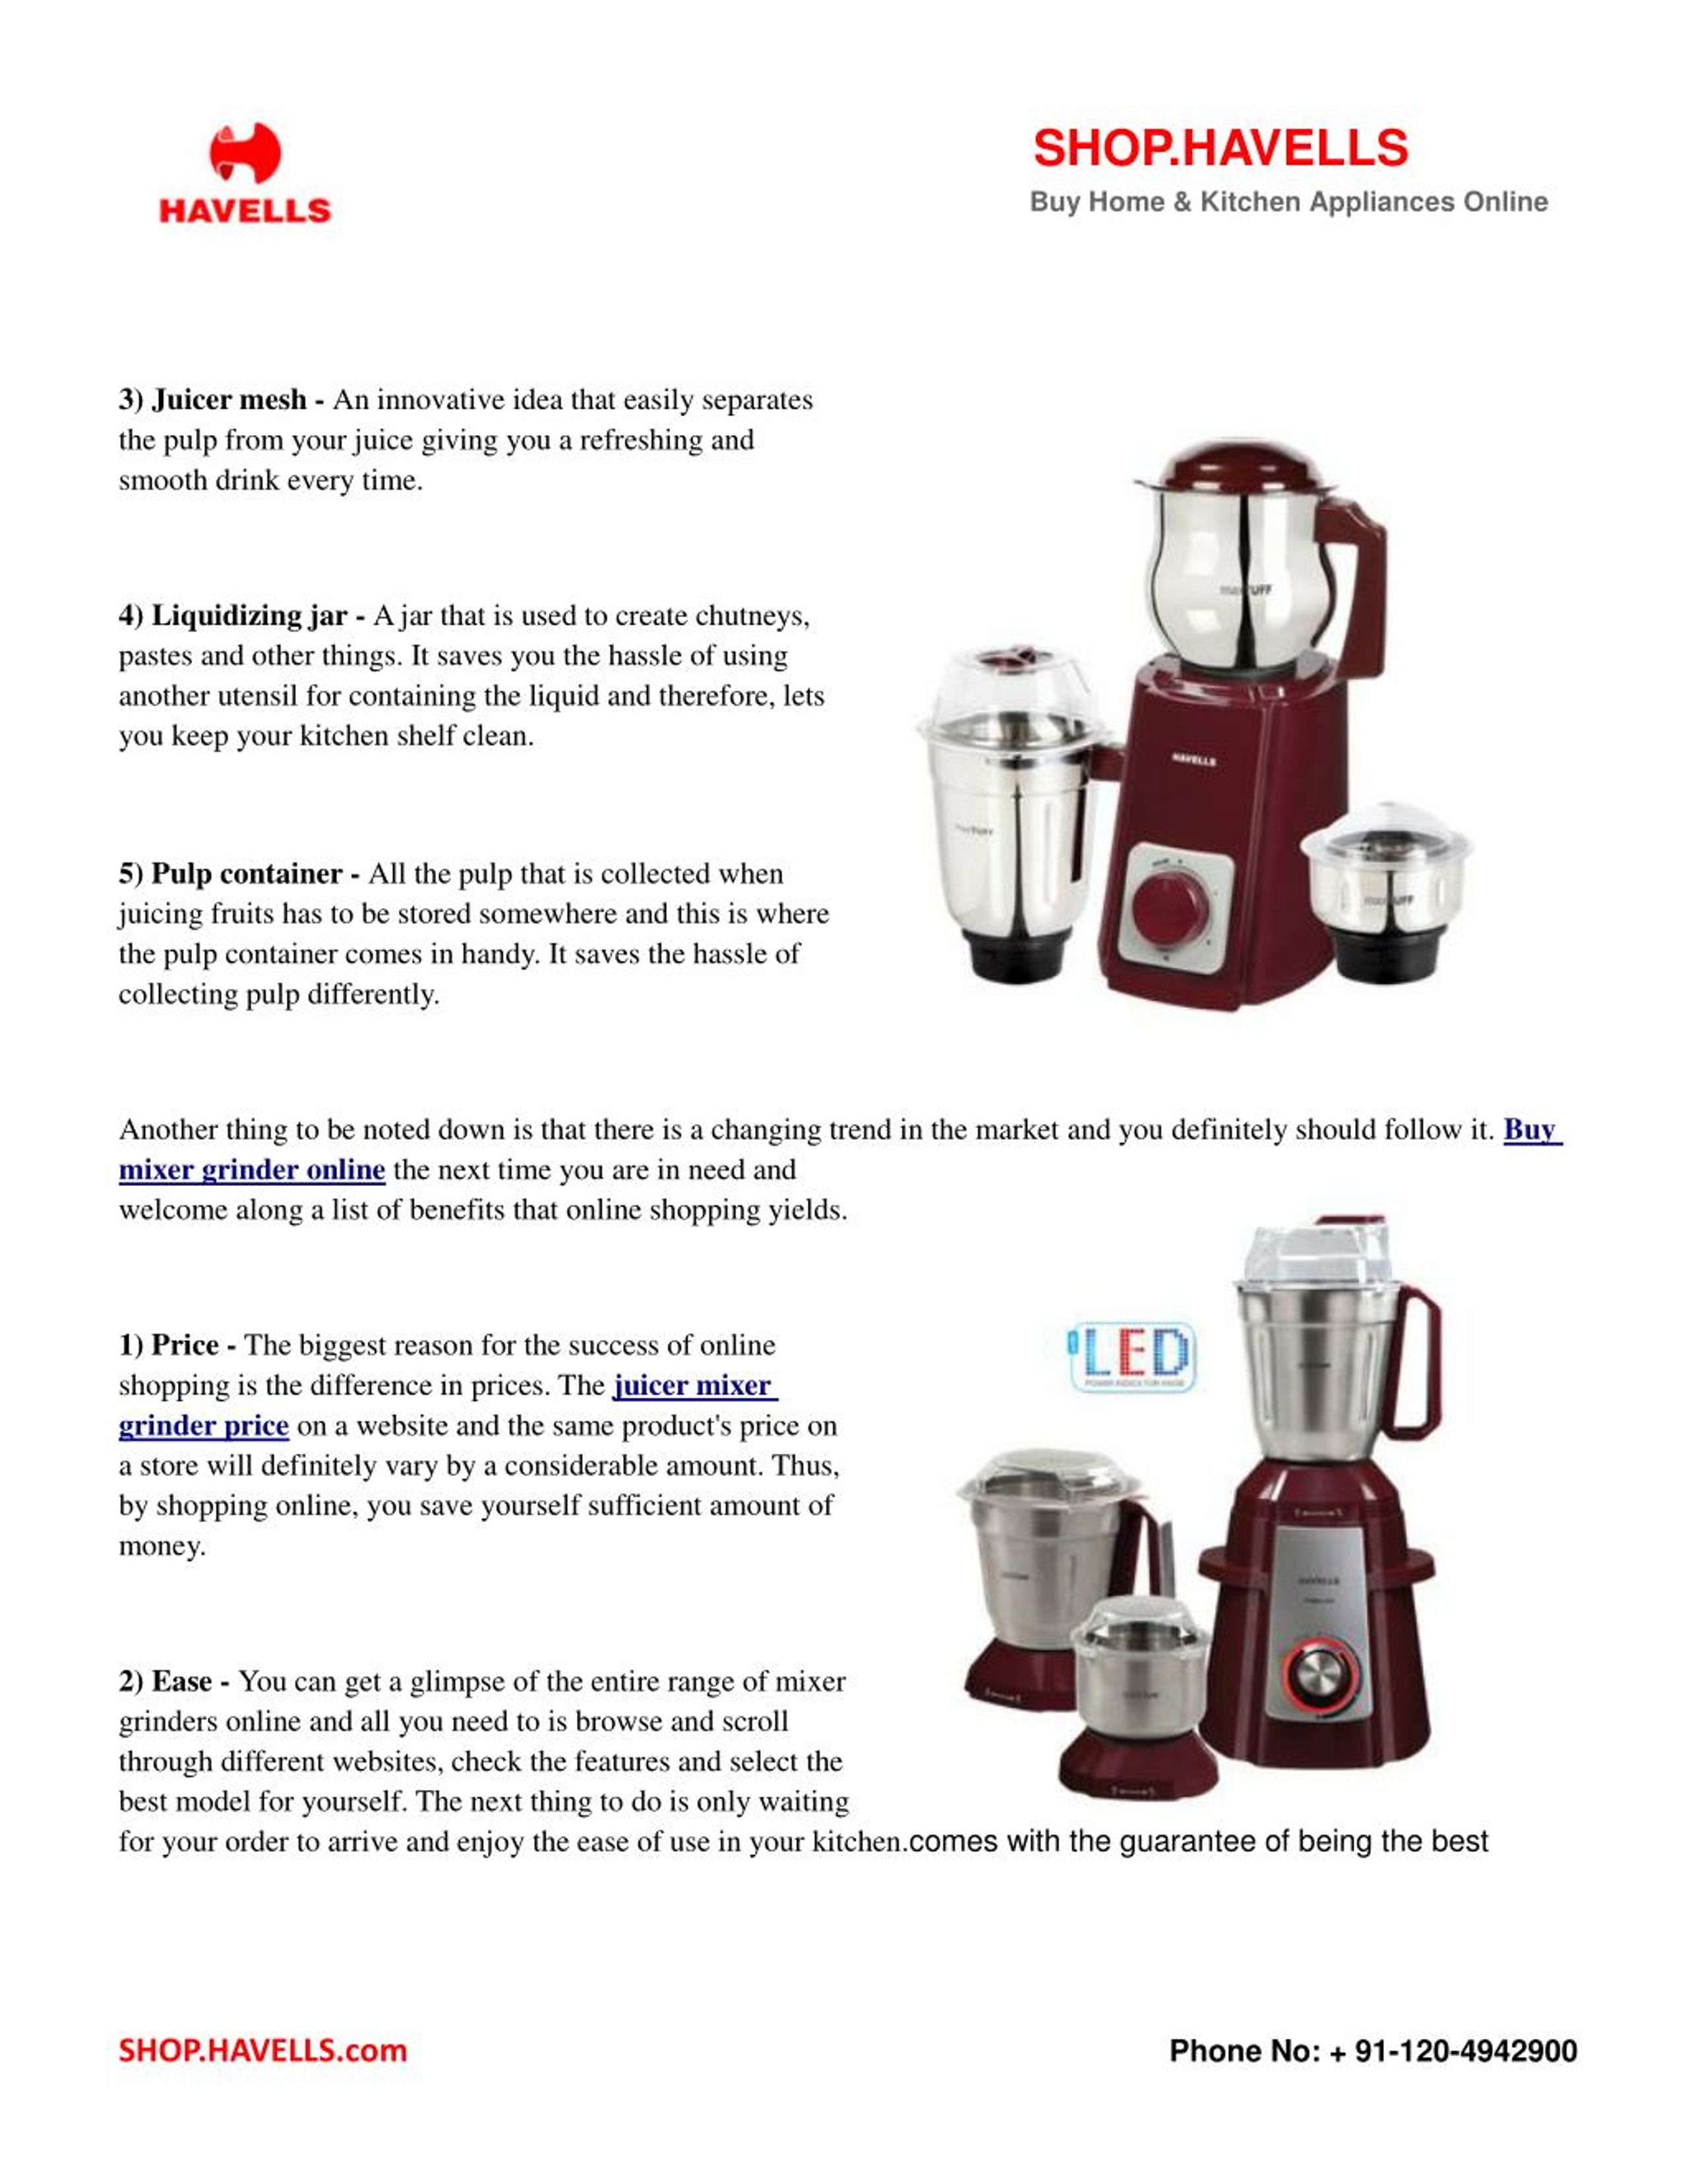 PPT - The Benefits of Juicer Mixer Grinders and Online Shopping ...